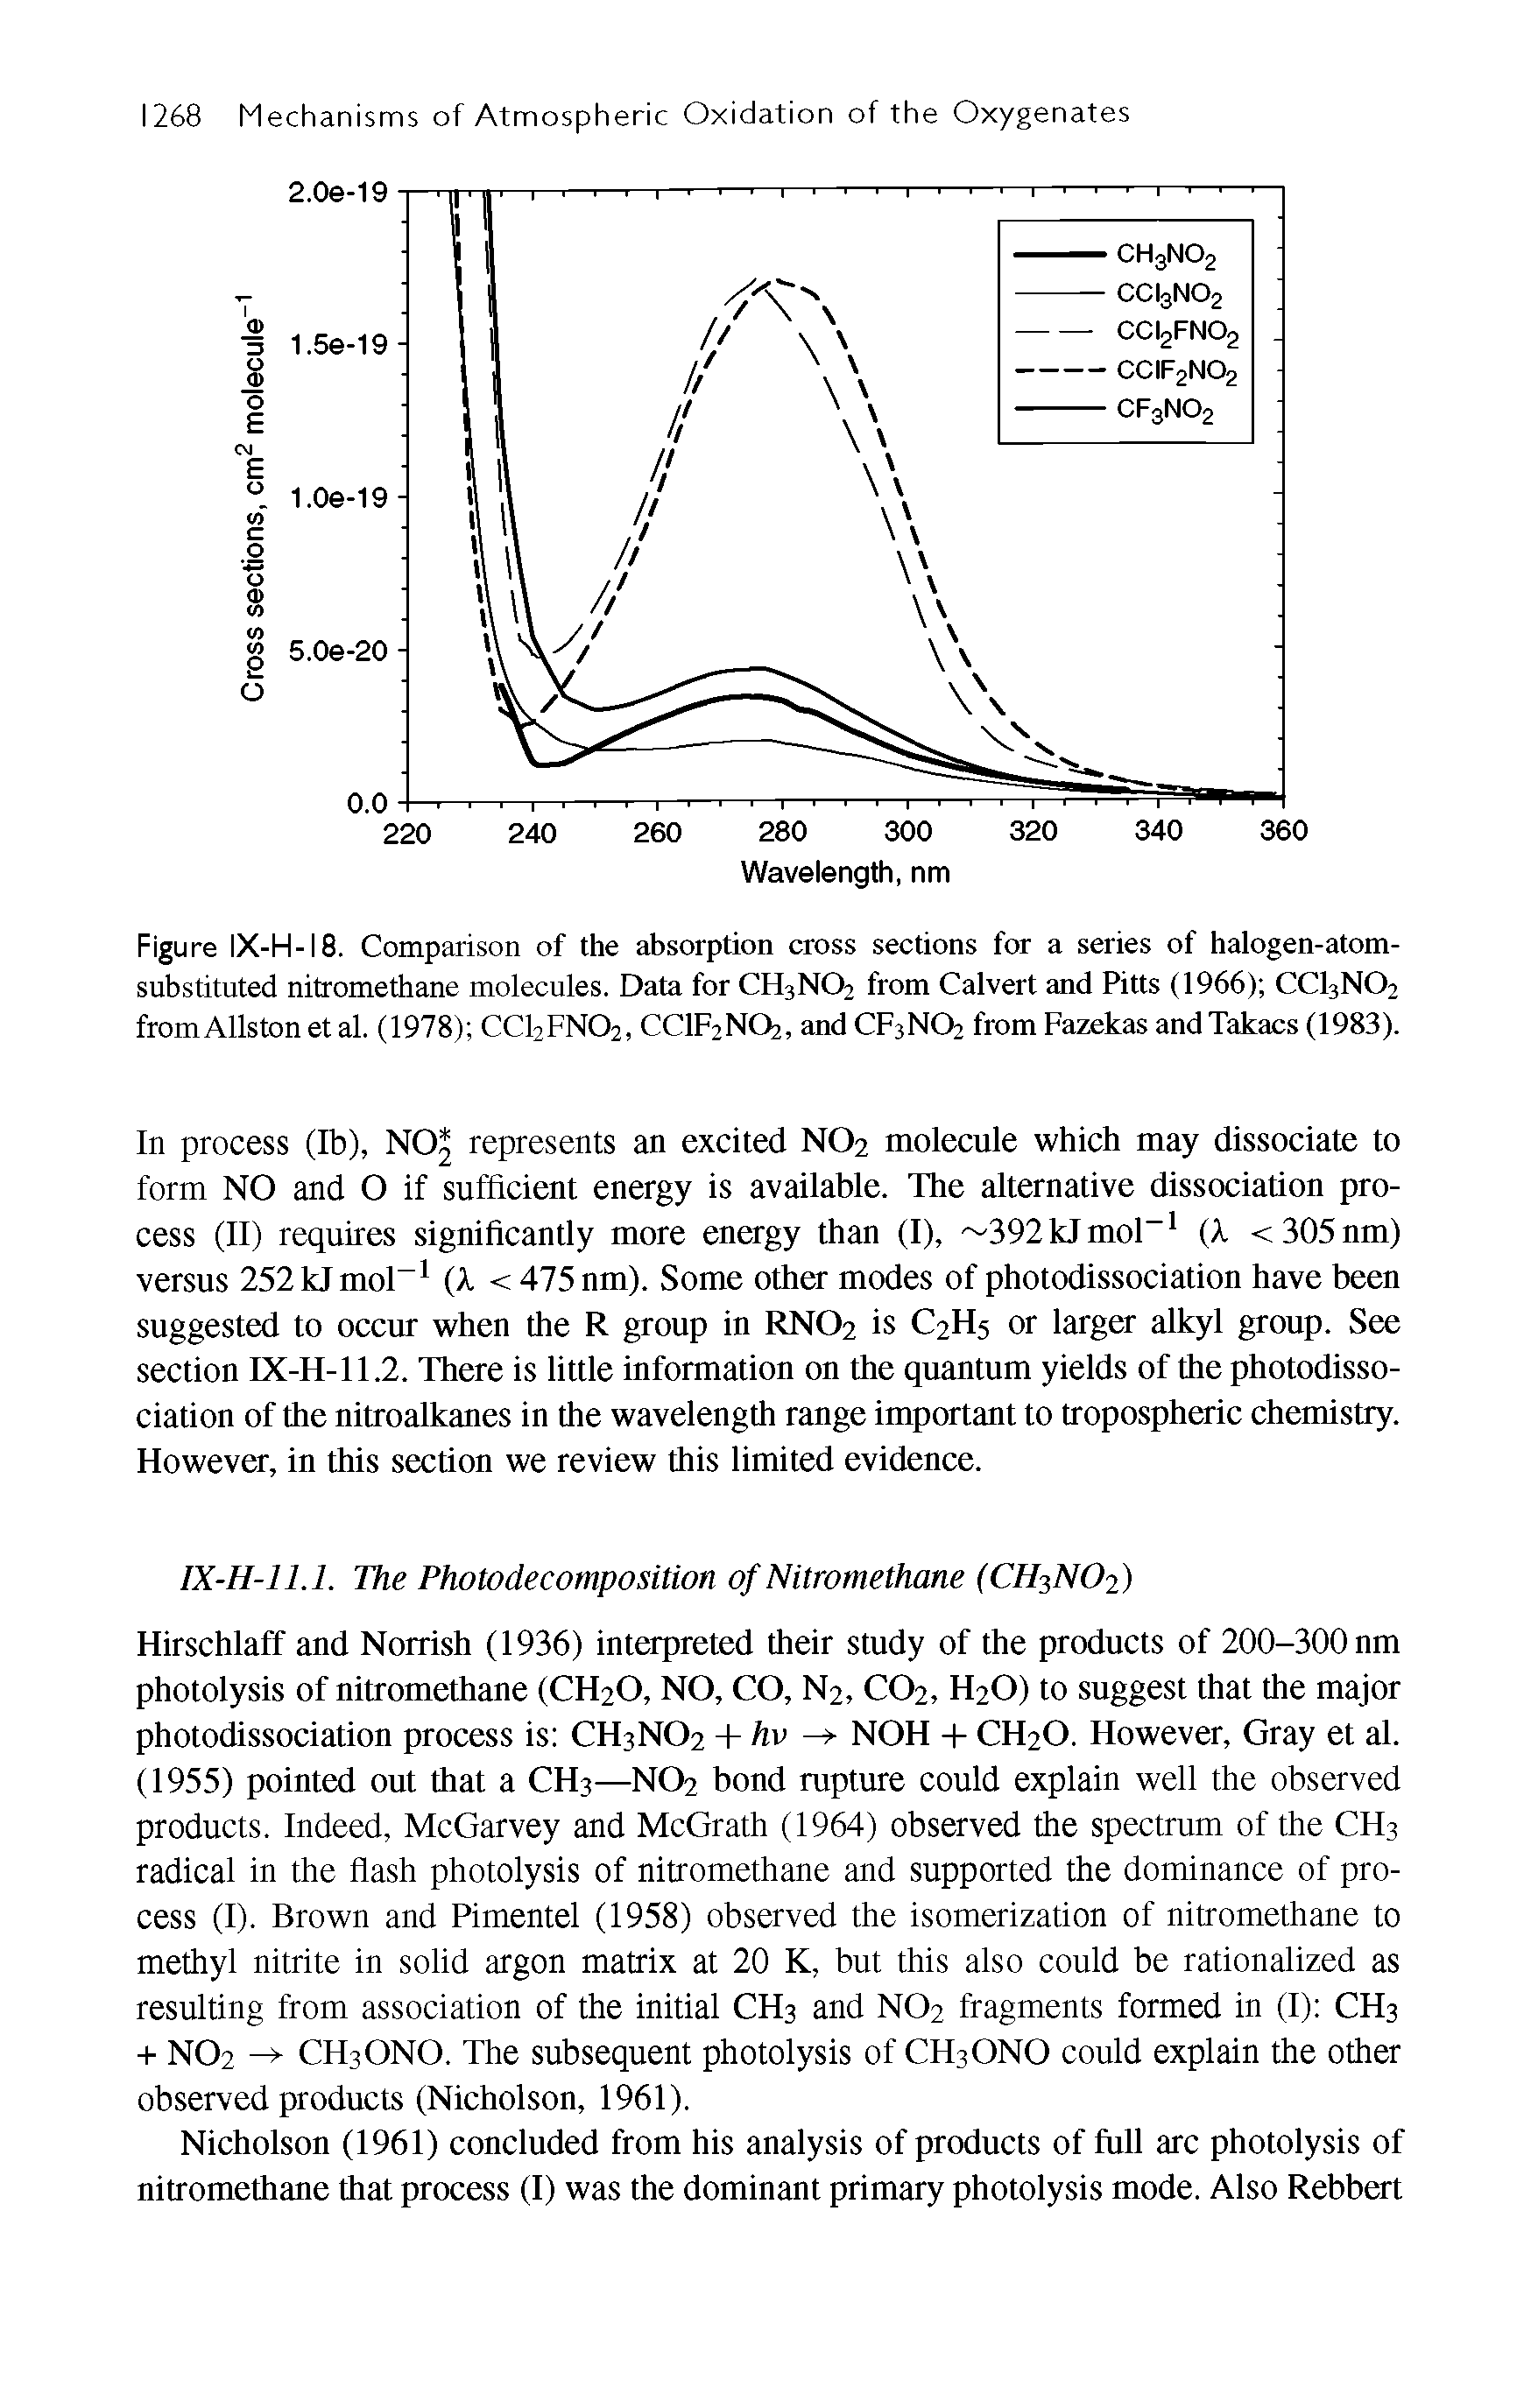 Figure IX-H-18. Comparison of the absorption cross sections for a series of halogen-atom-substituted nitromethane molecules. Data for CH3NO2 from Calvert and Pitts (1966) CCI3NO2 fromAllston et al. (1978) CCI2FNO2, CCIF2NO2, and CF3NO2 from Fazekas andTakacs (1983).